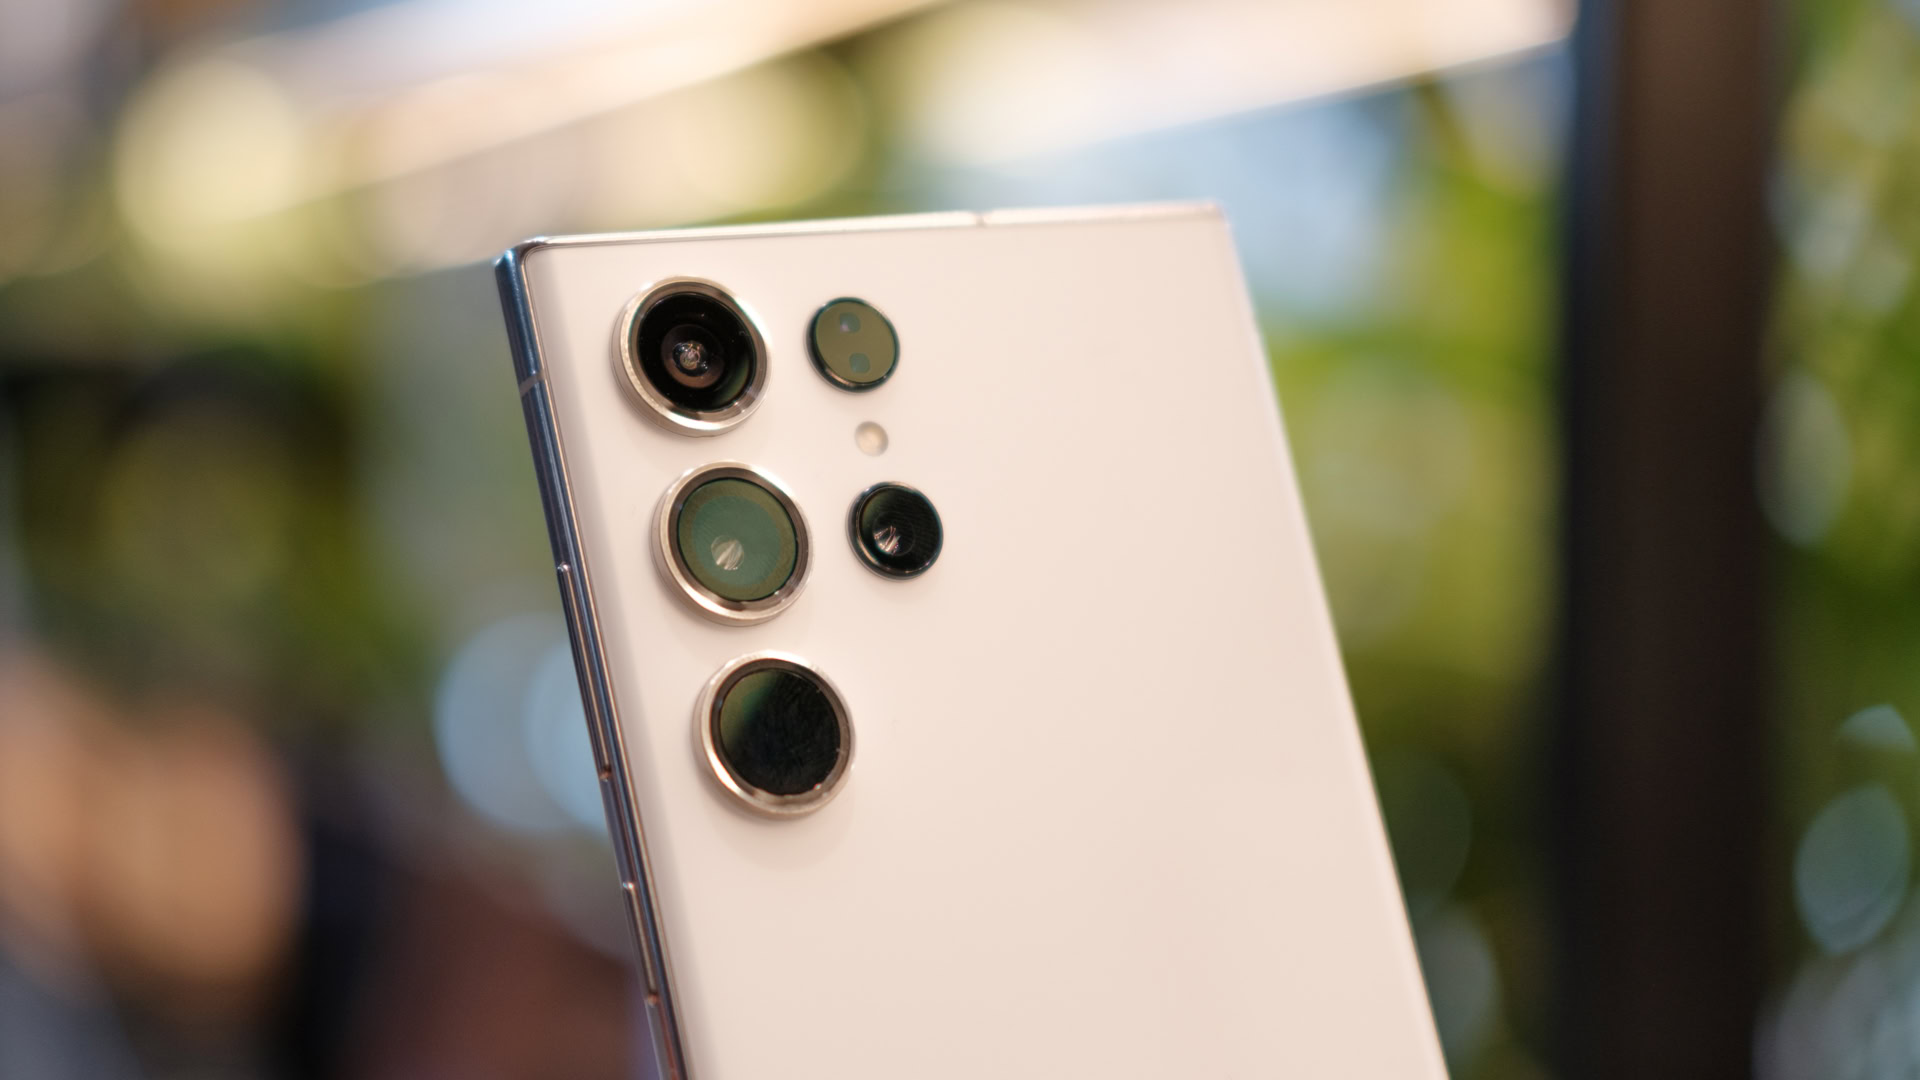 Samsung Galaxy S23 cameras: What you need to know - Android Authority